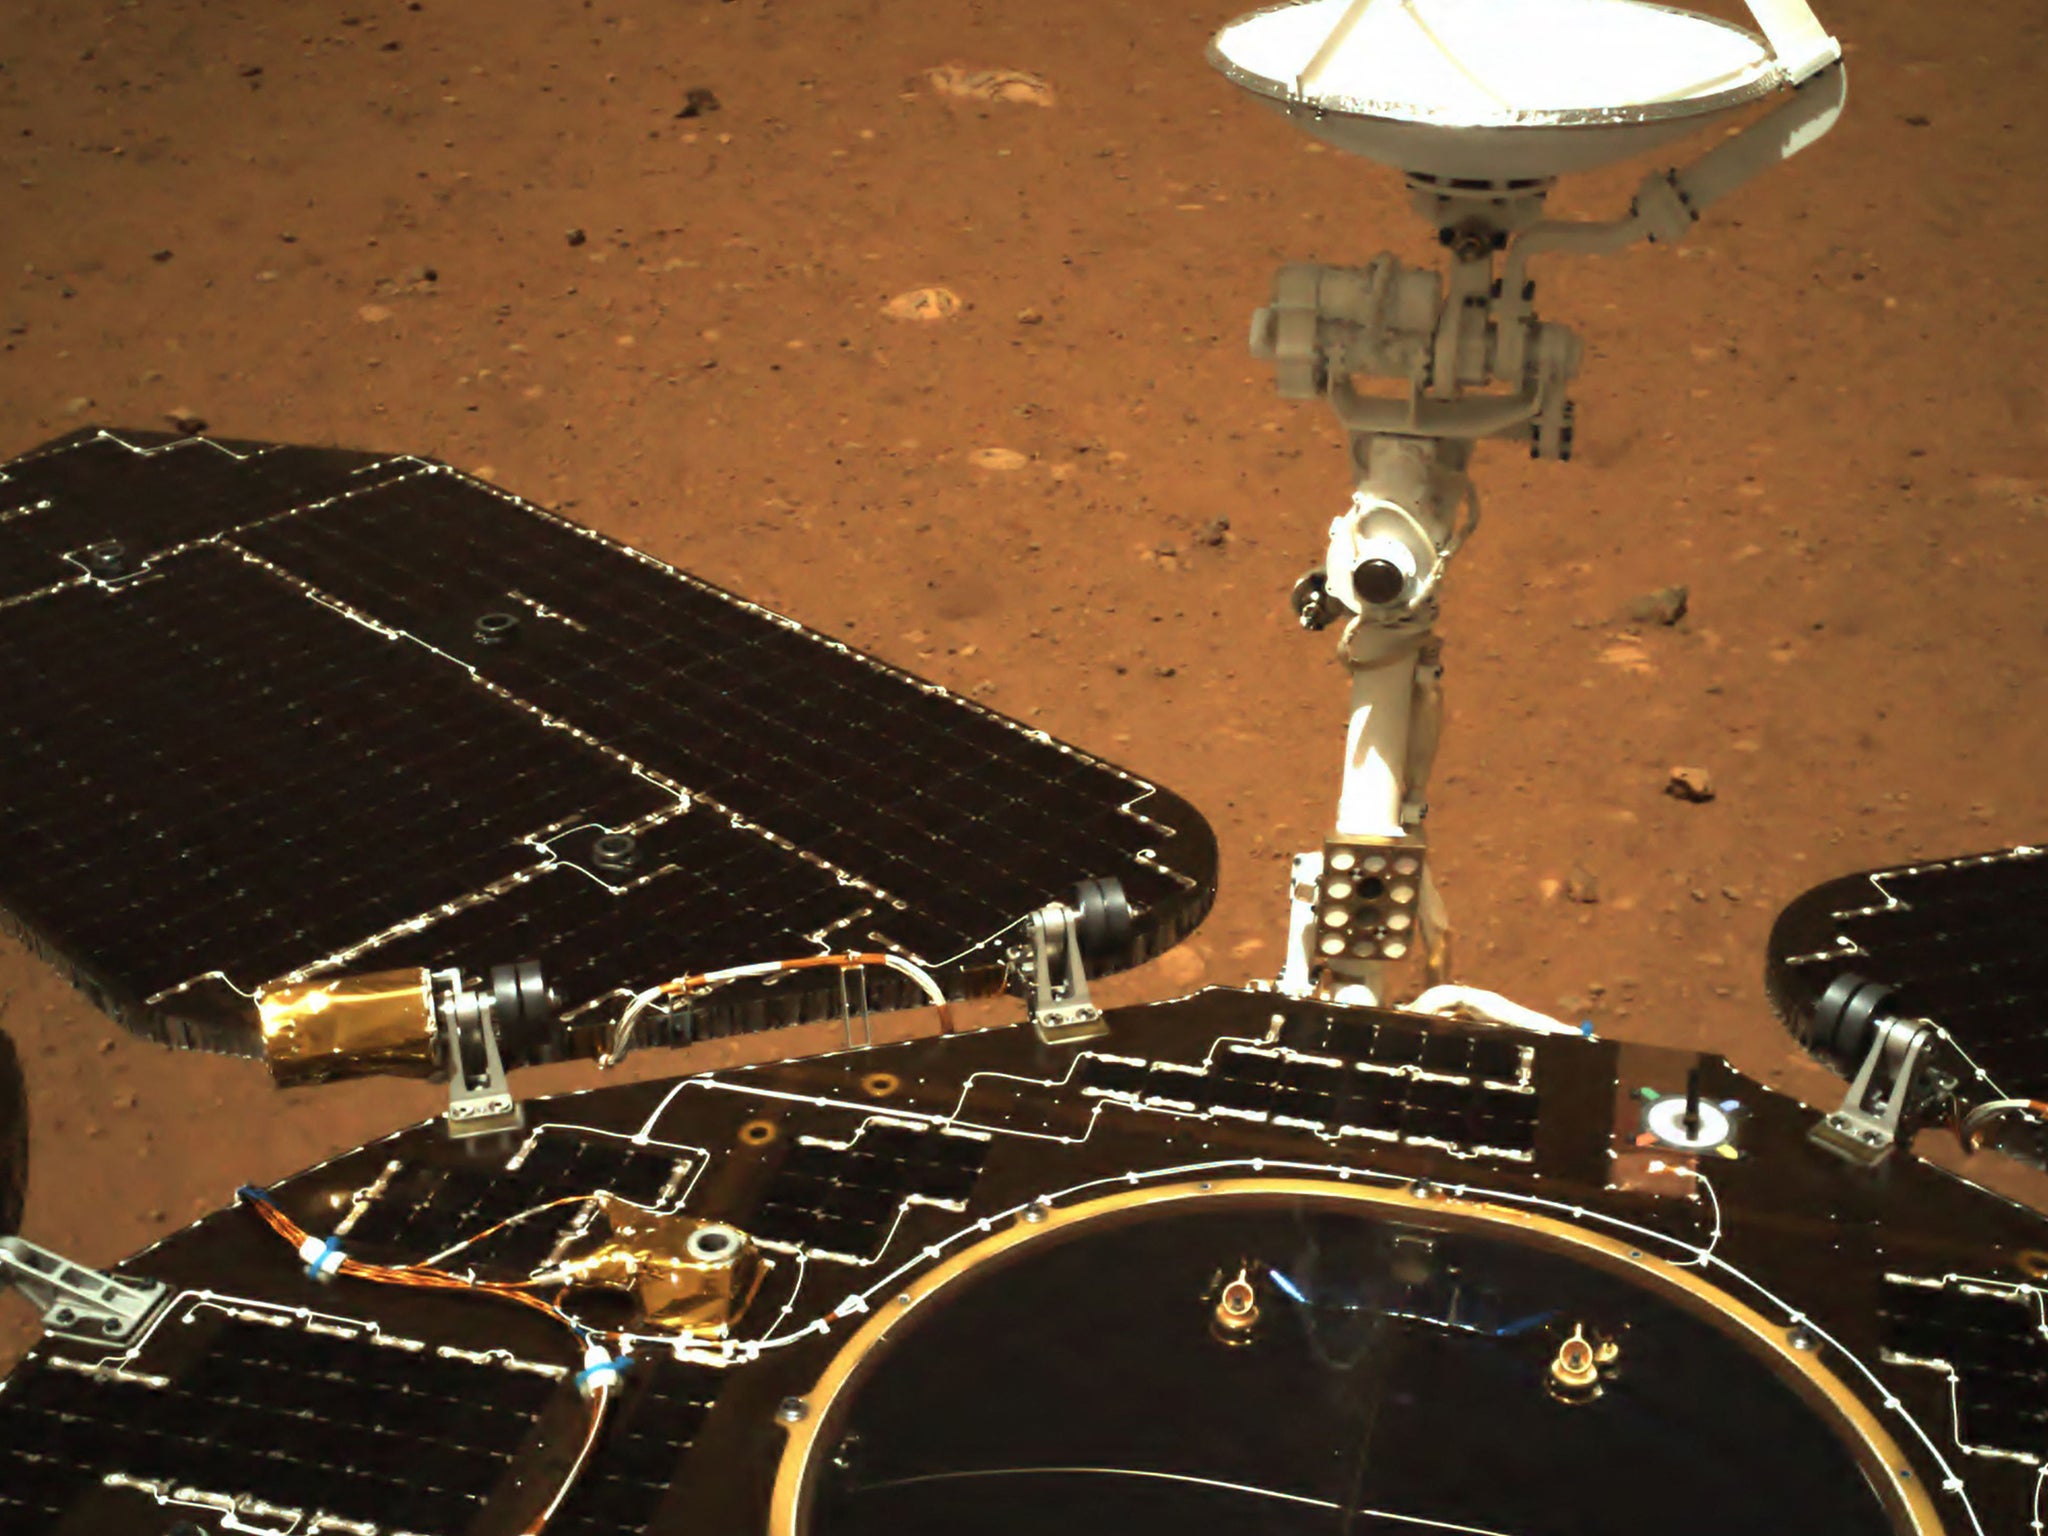 China’s space agency released the first photos from Mars’s surface on 19 May